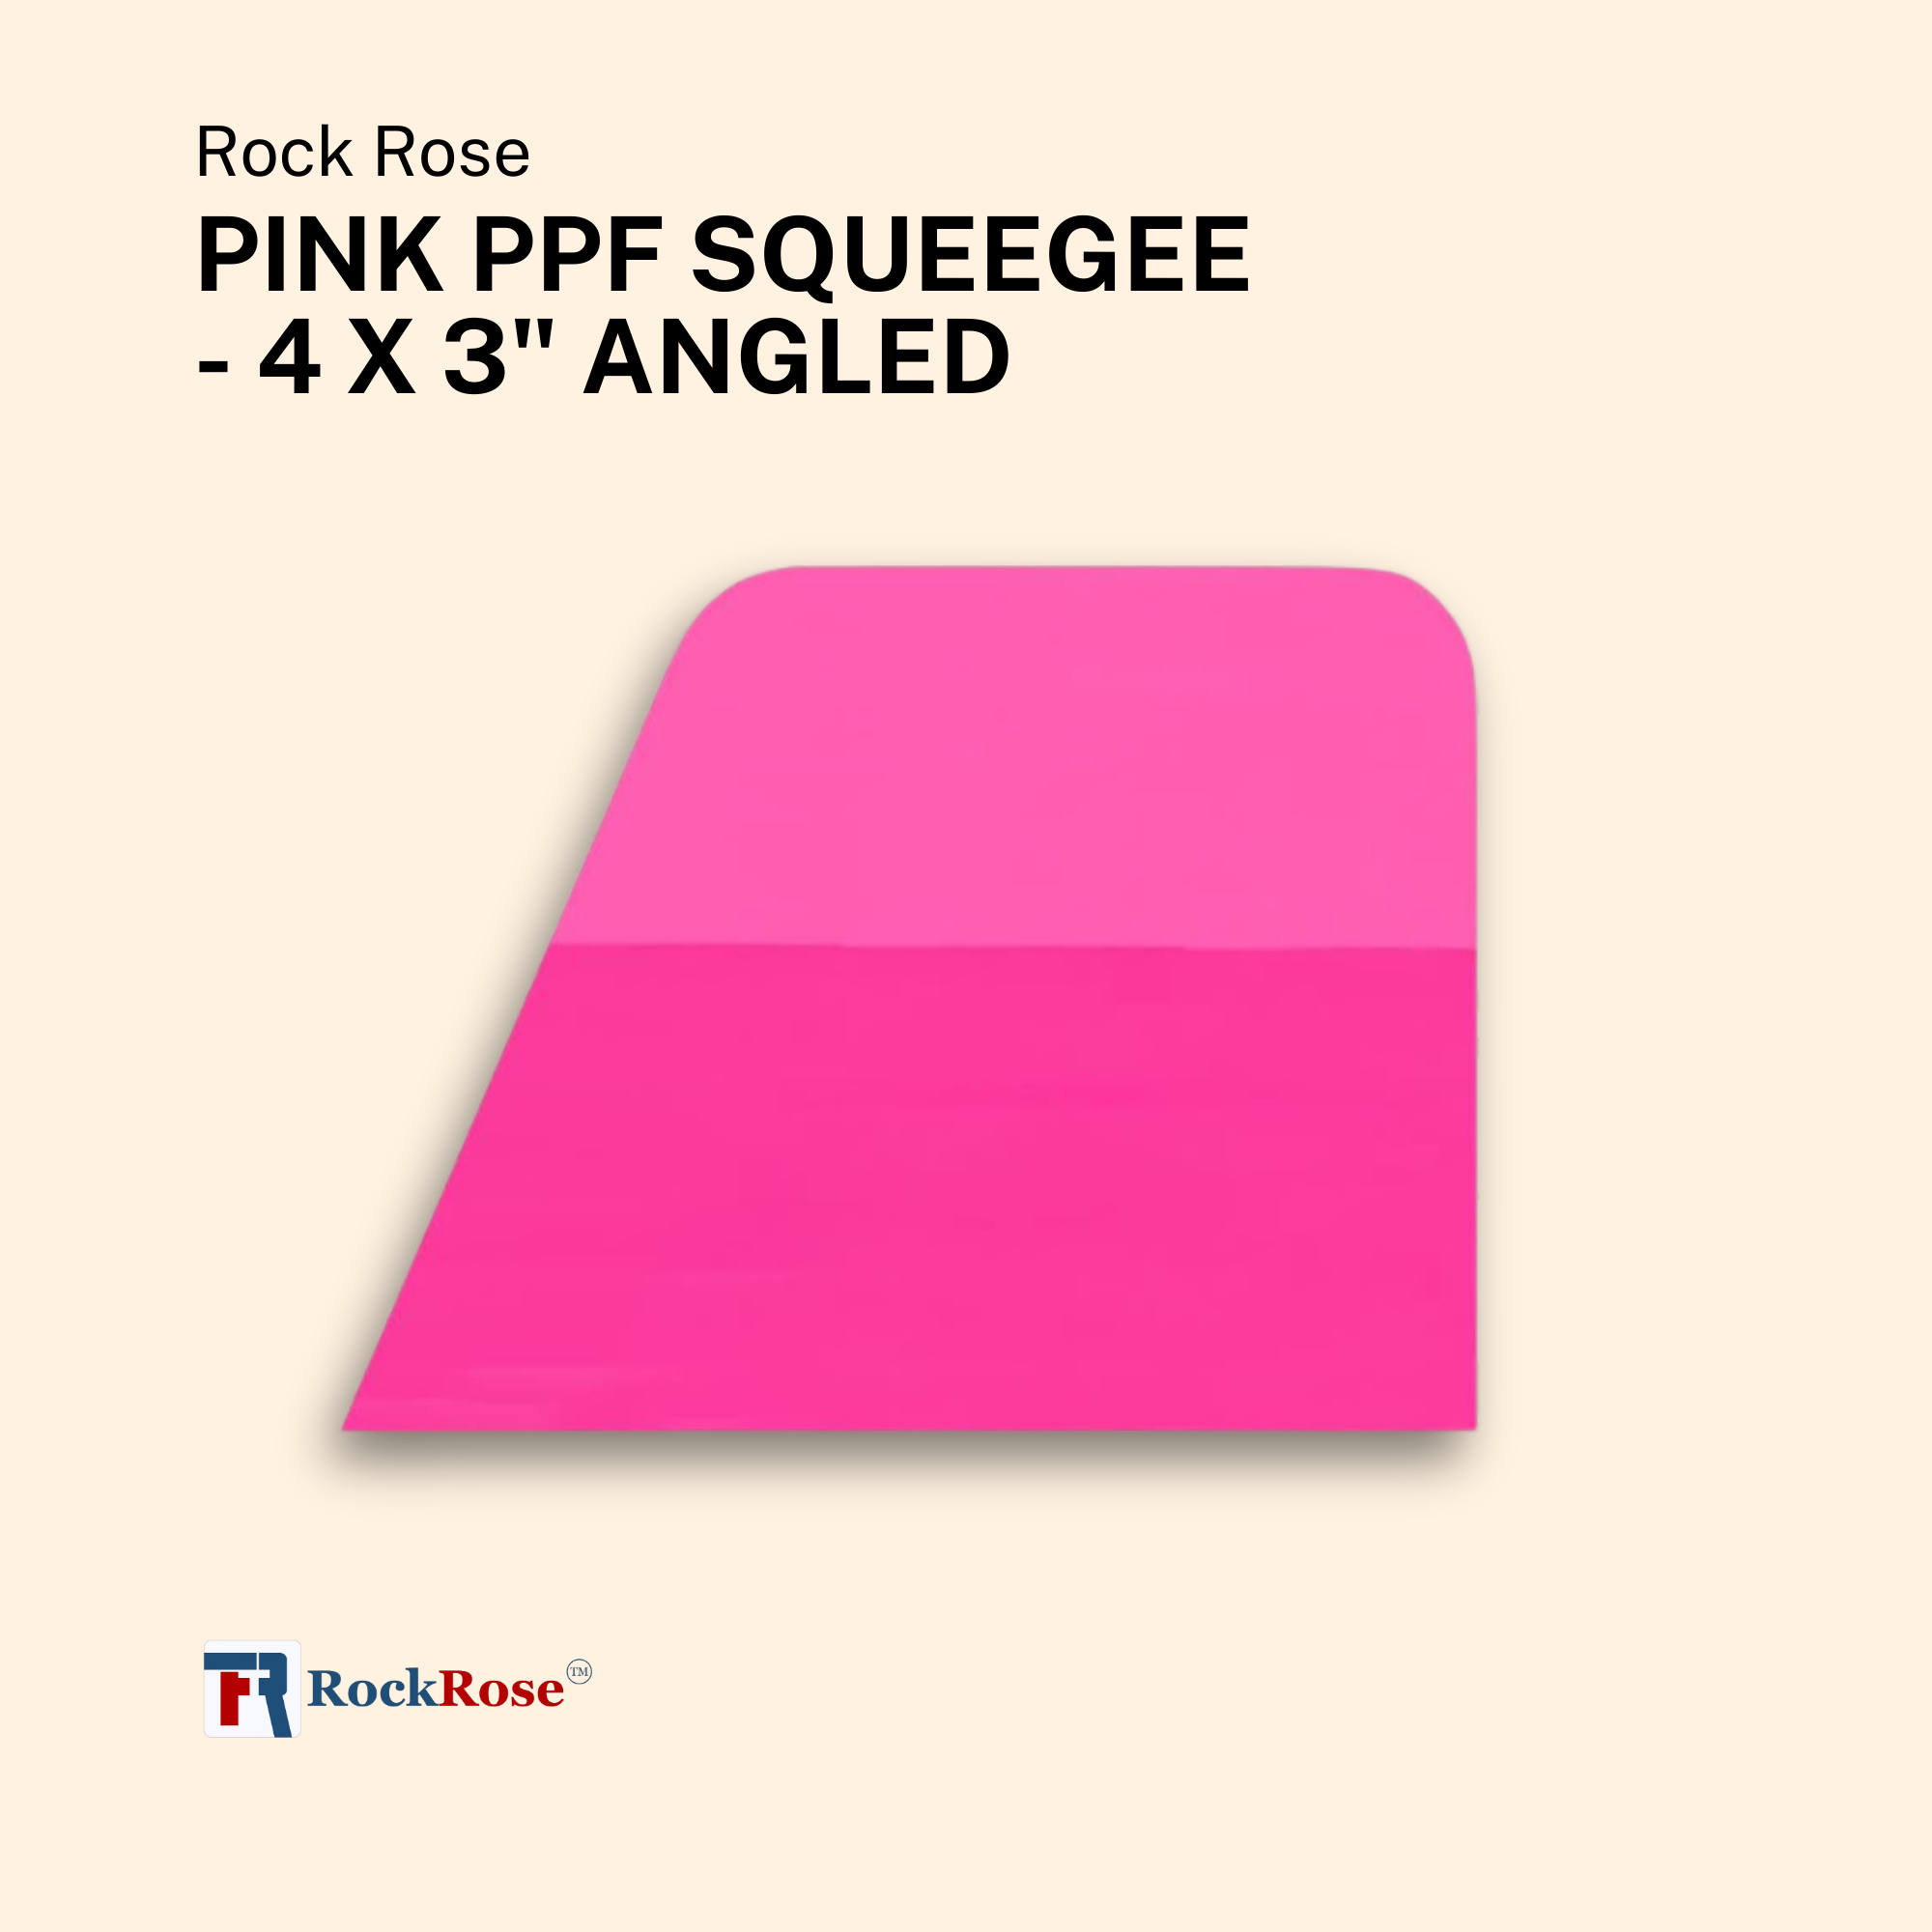 Pink PPF squeegee for paint protection film applications